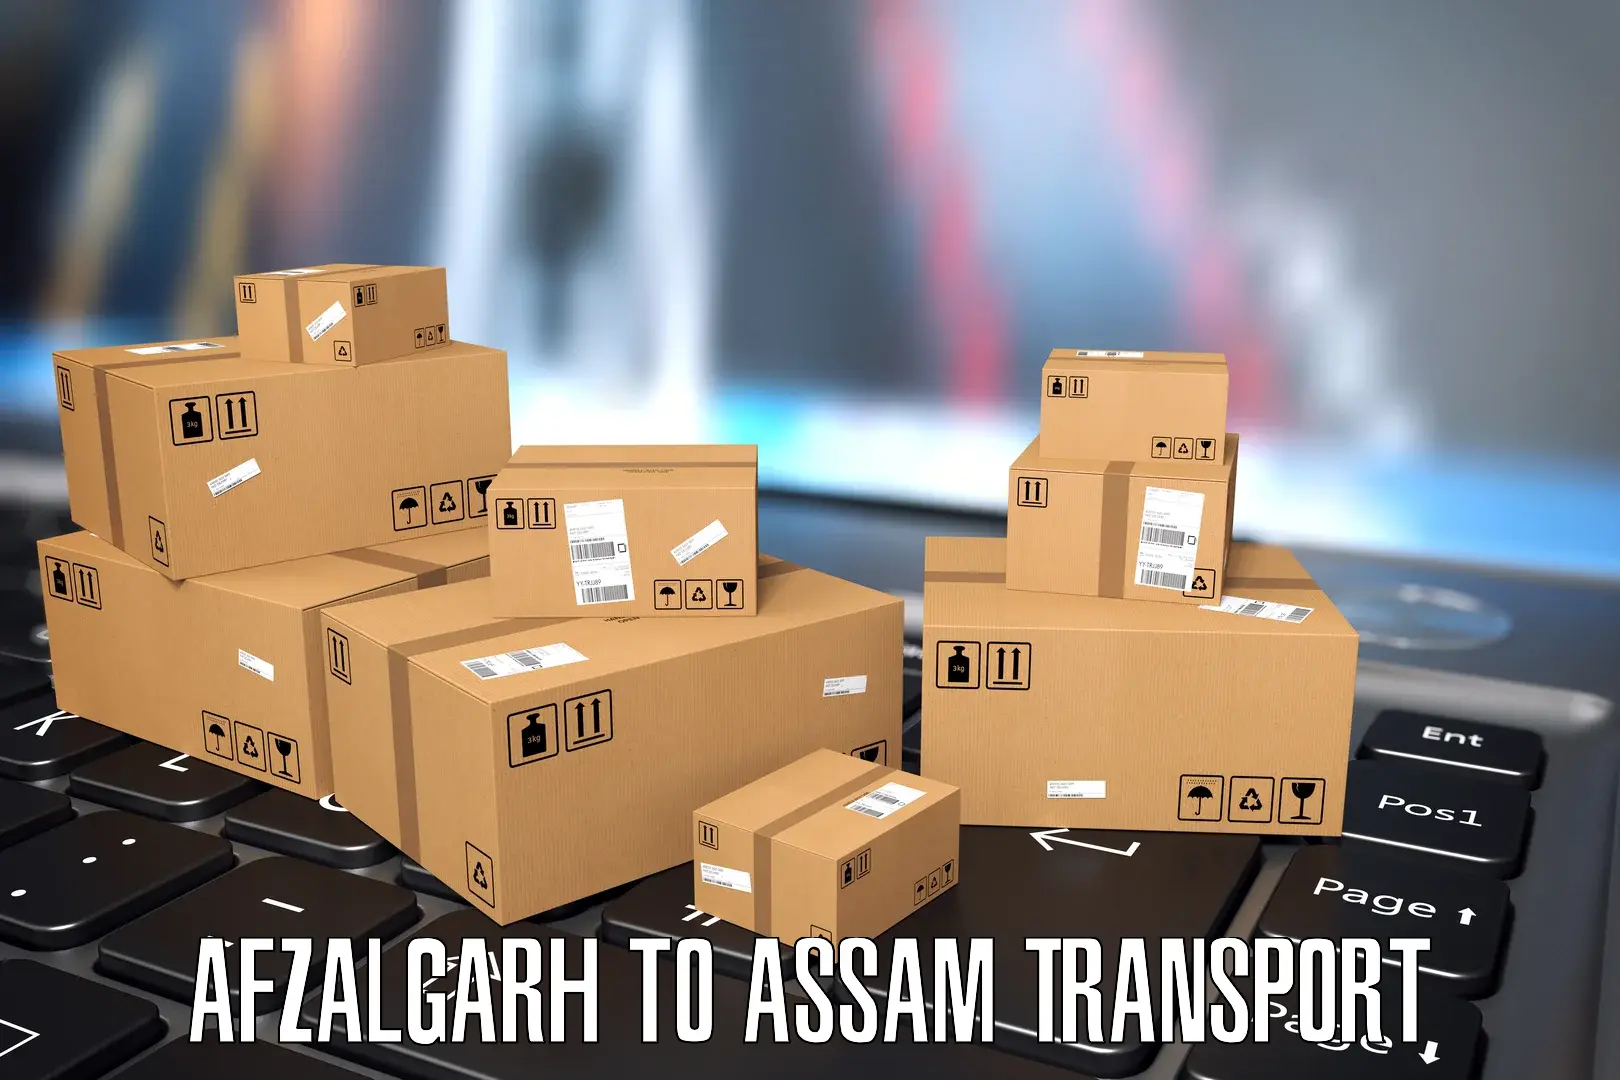 Container transport service Afzalgarh to Assam